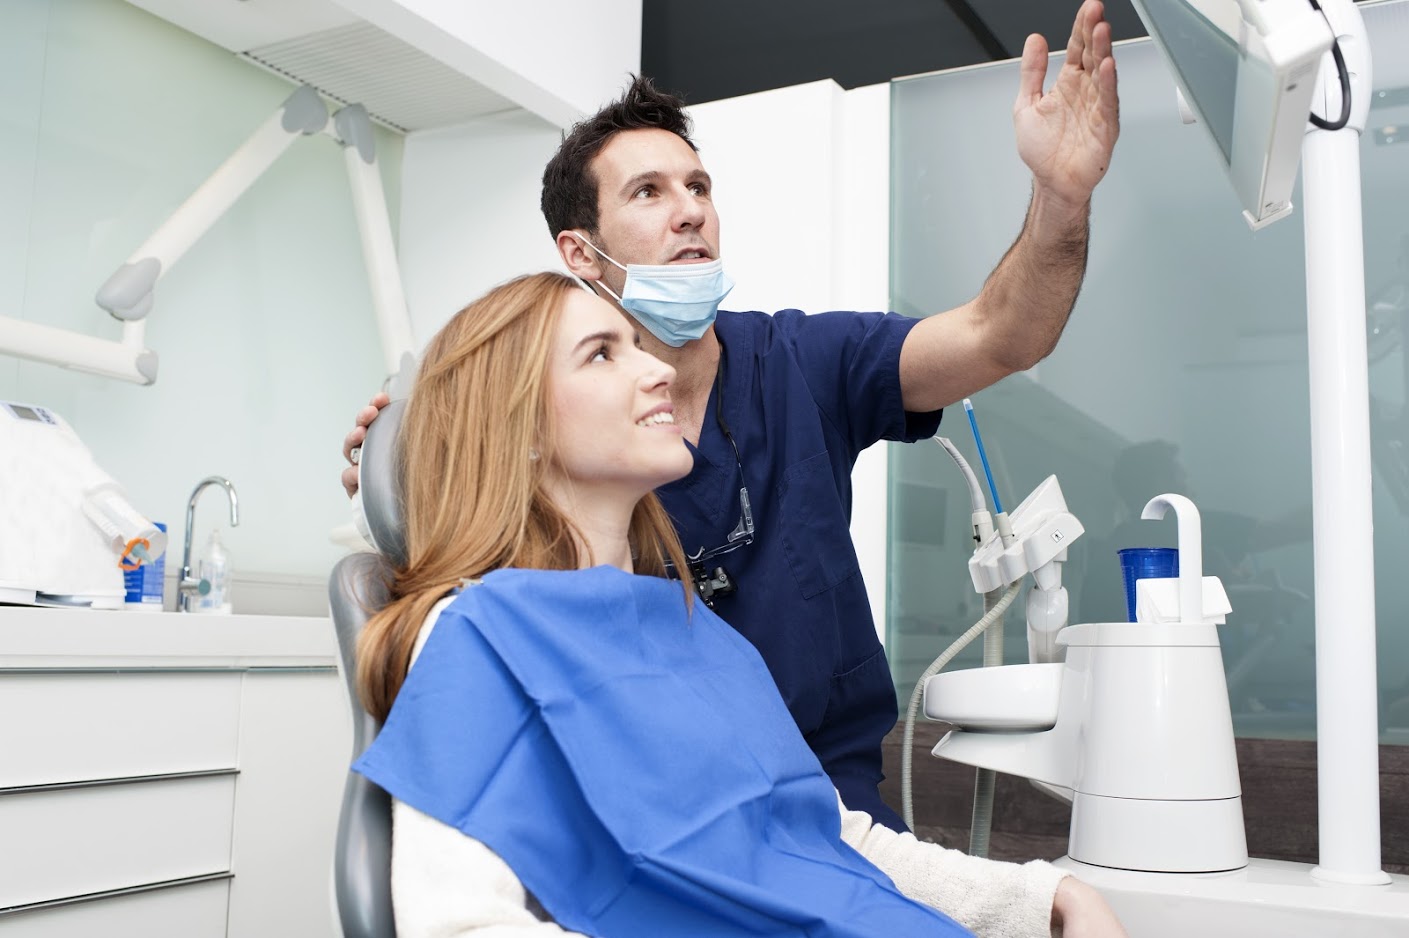 Sedation dentistry can make your visit to the dentist much more comfortable. Contact Snodgrass-King in Tennessee